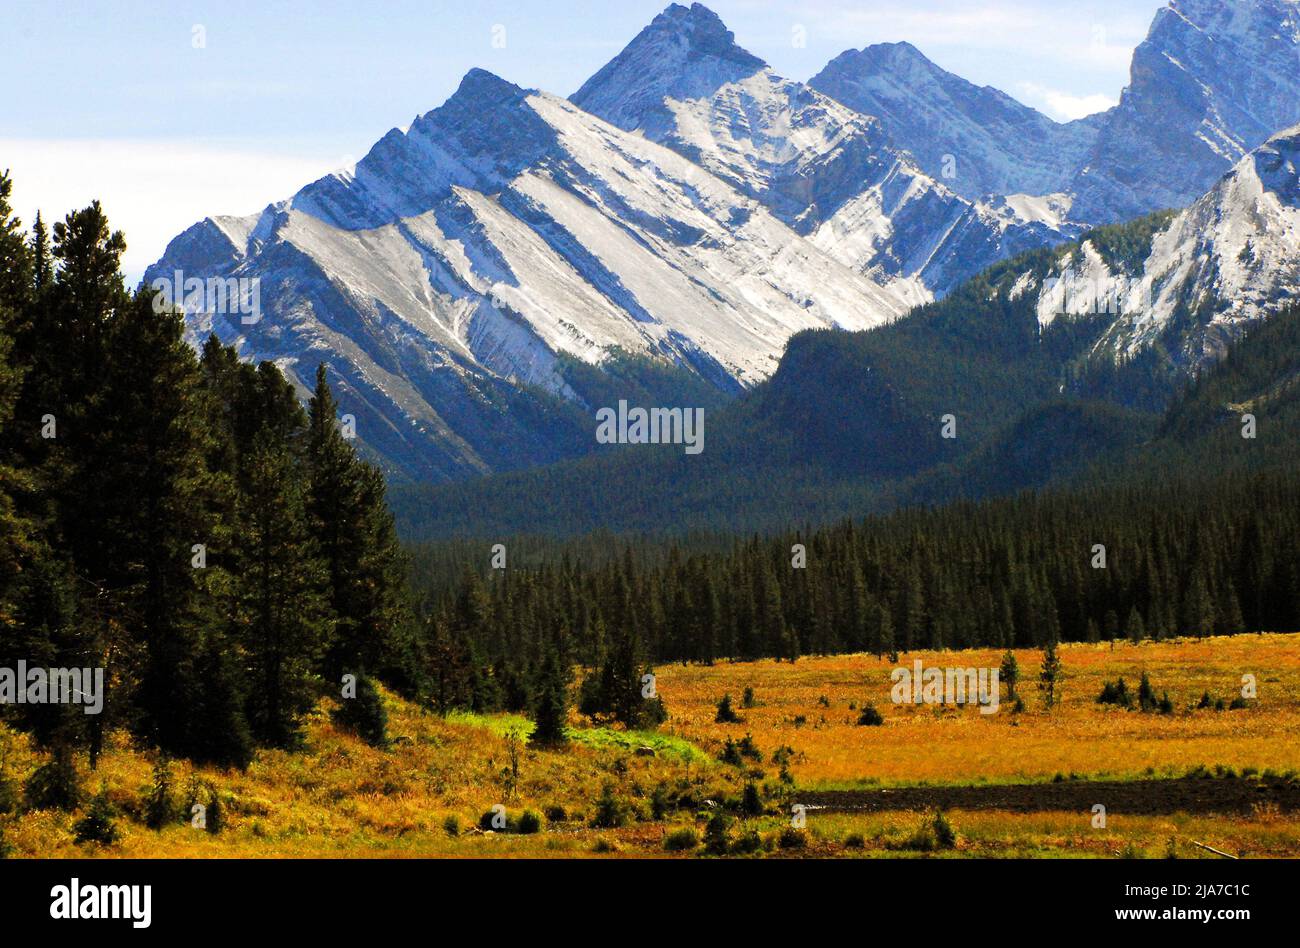 Gorgeous panorama of a colorful forested valley with snow capped Rocky Mountains in the background.  Shot in the Banff National Park, Alberta, Canada. Stock Photo